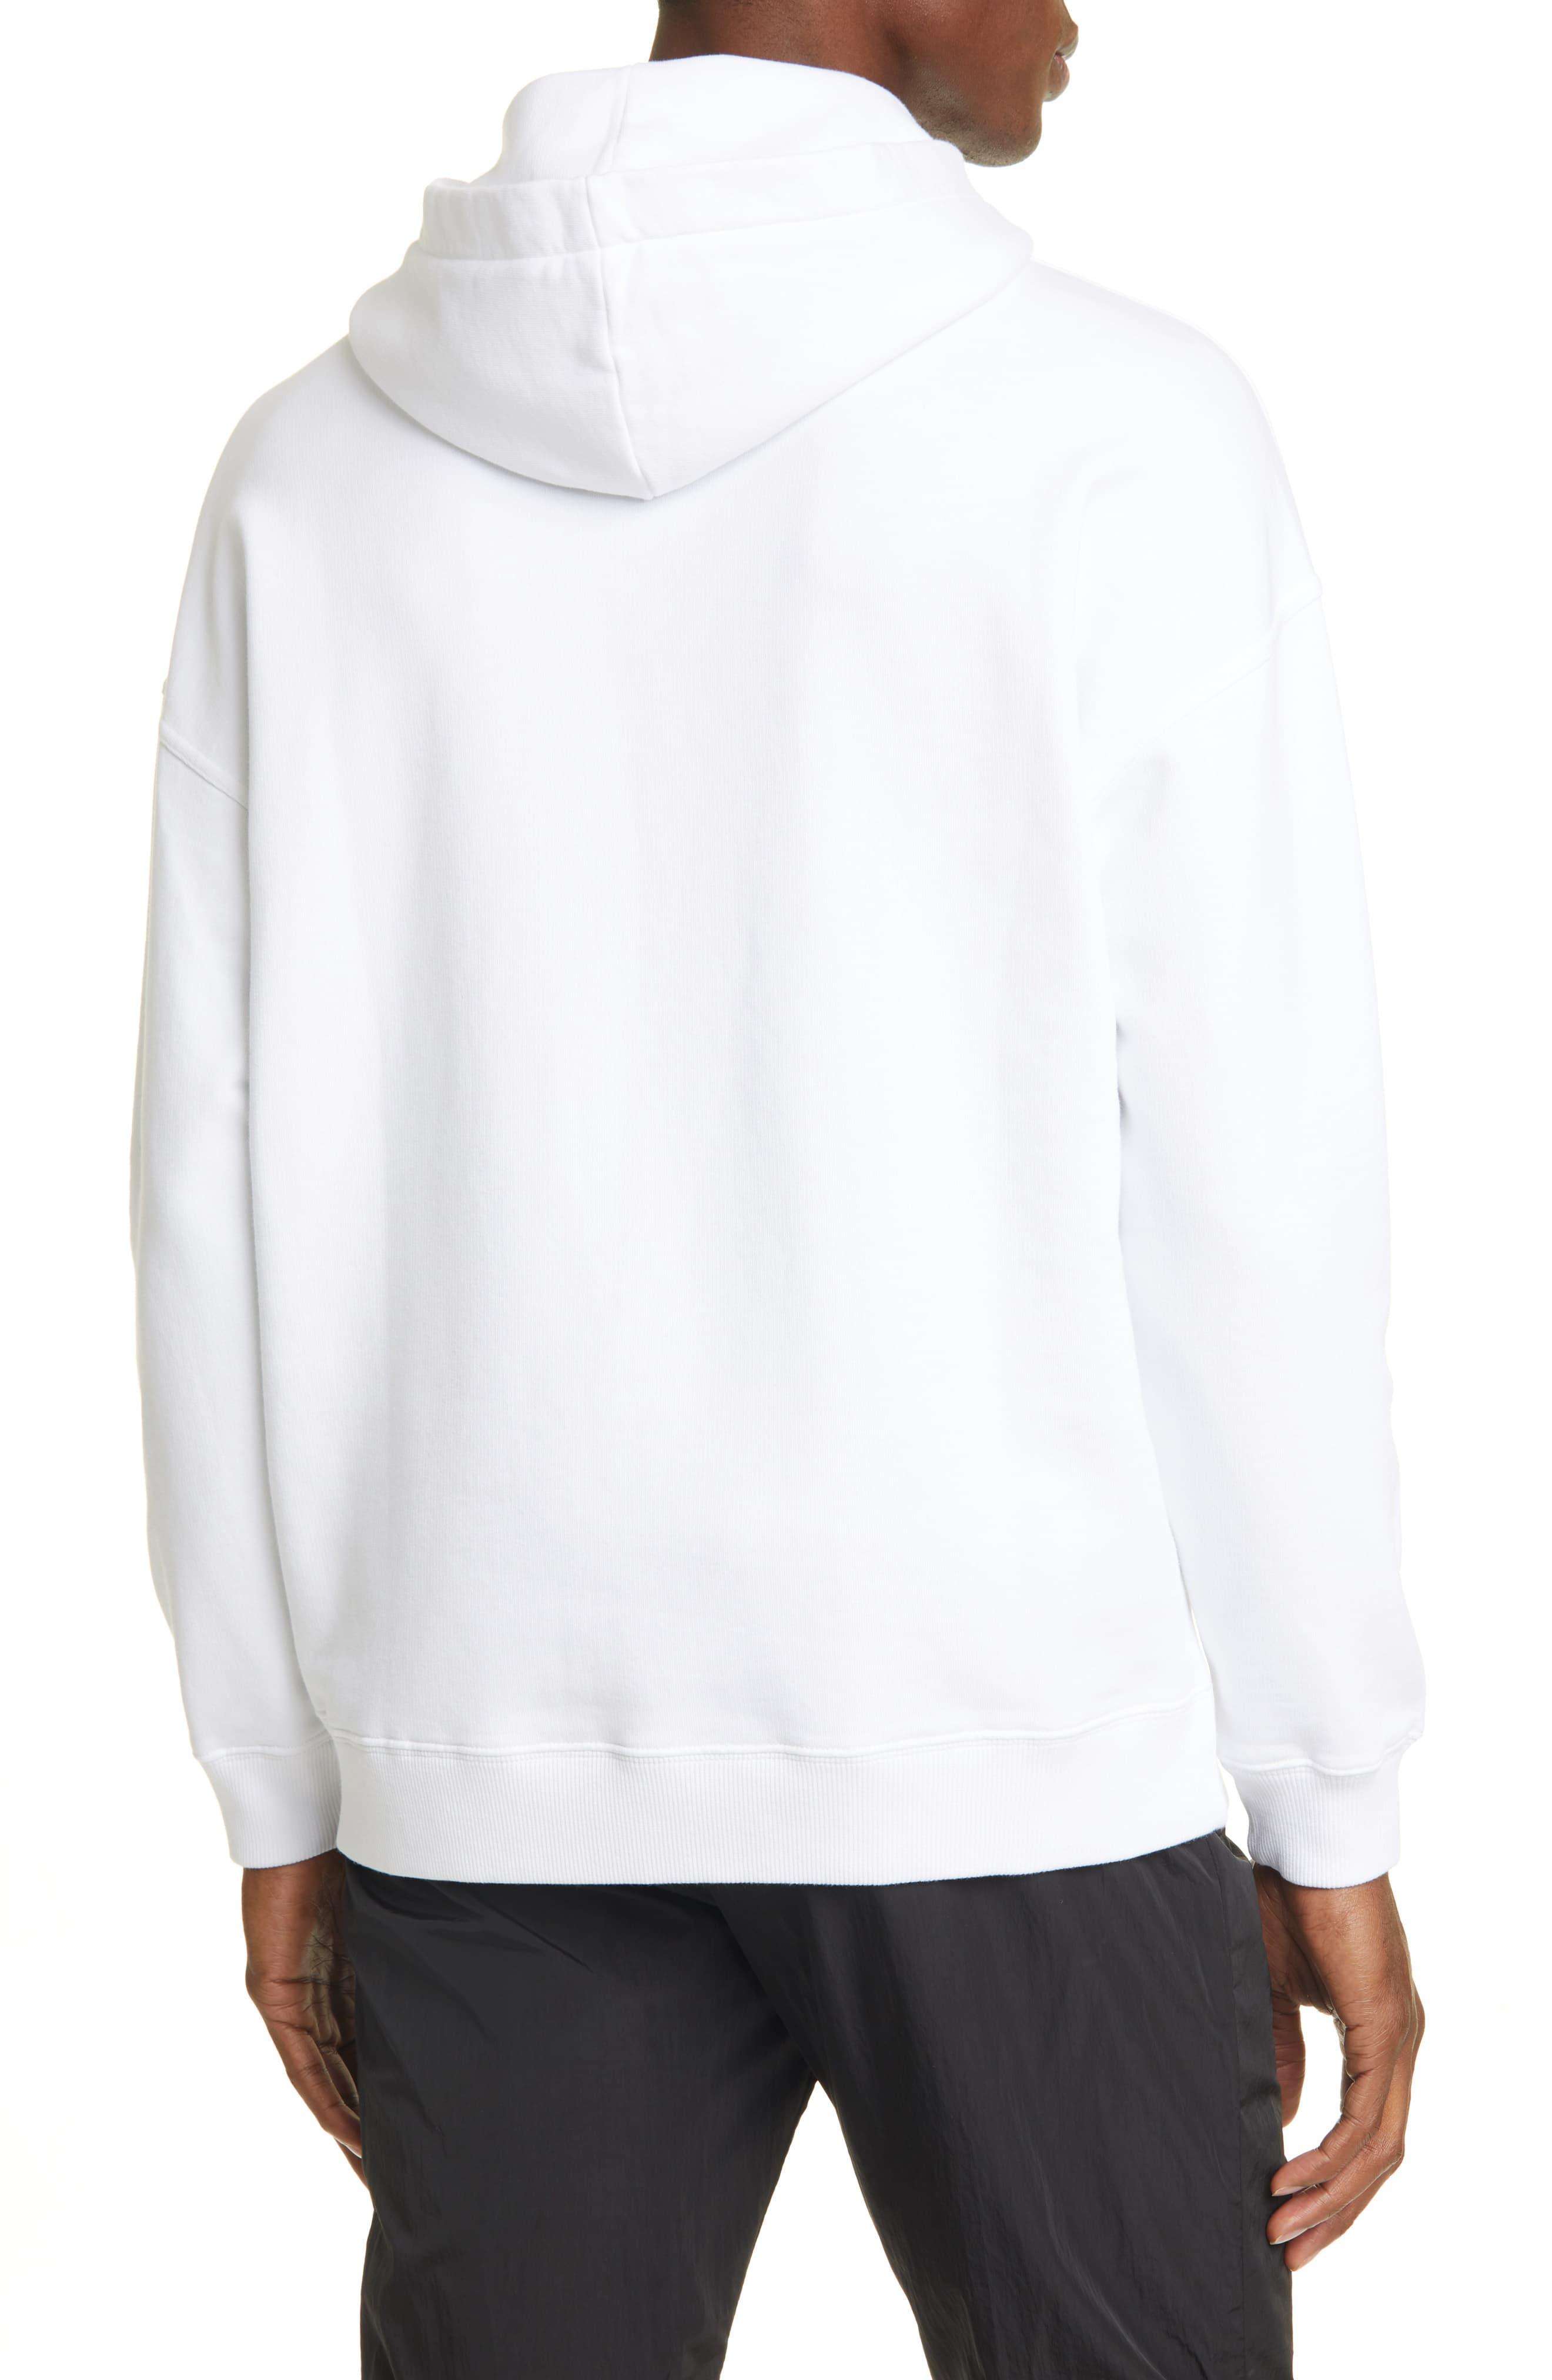 Givenchy Logo Graphic Hoodie in White for Men - Lyst